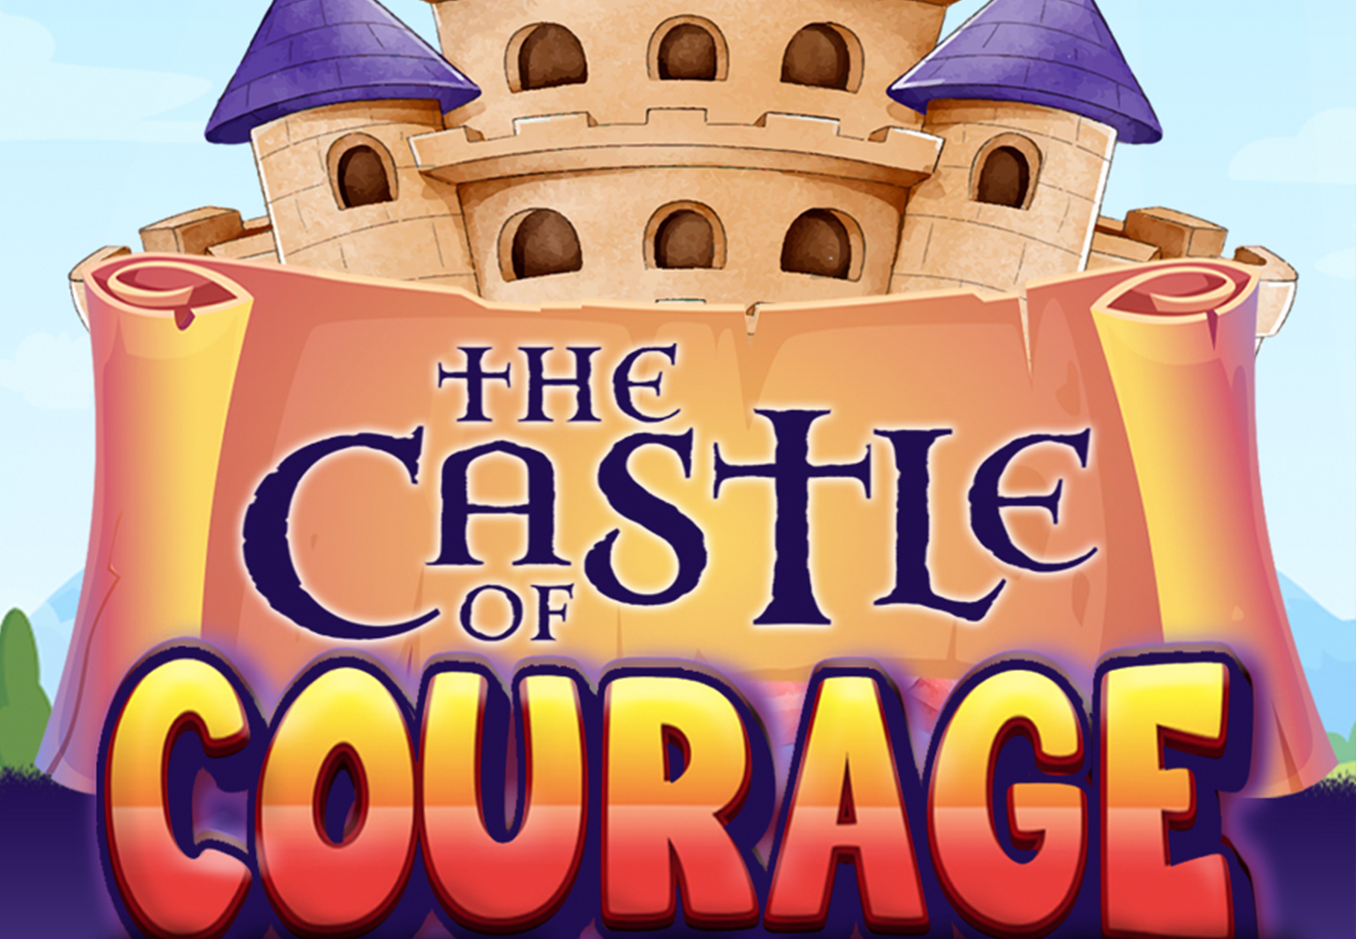 Castle of Courage VBS Curriculum